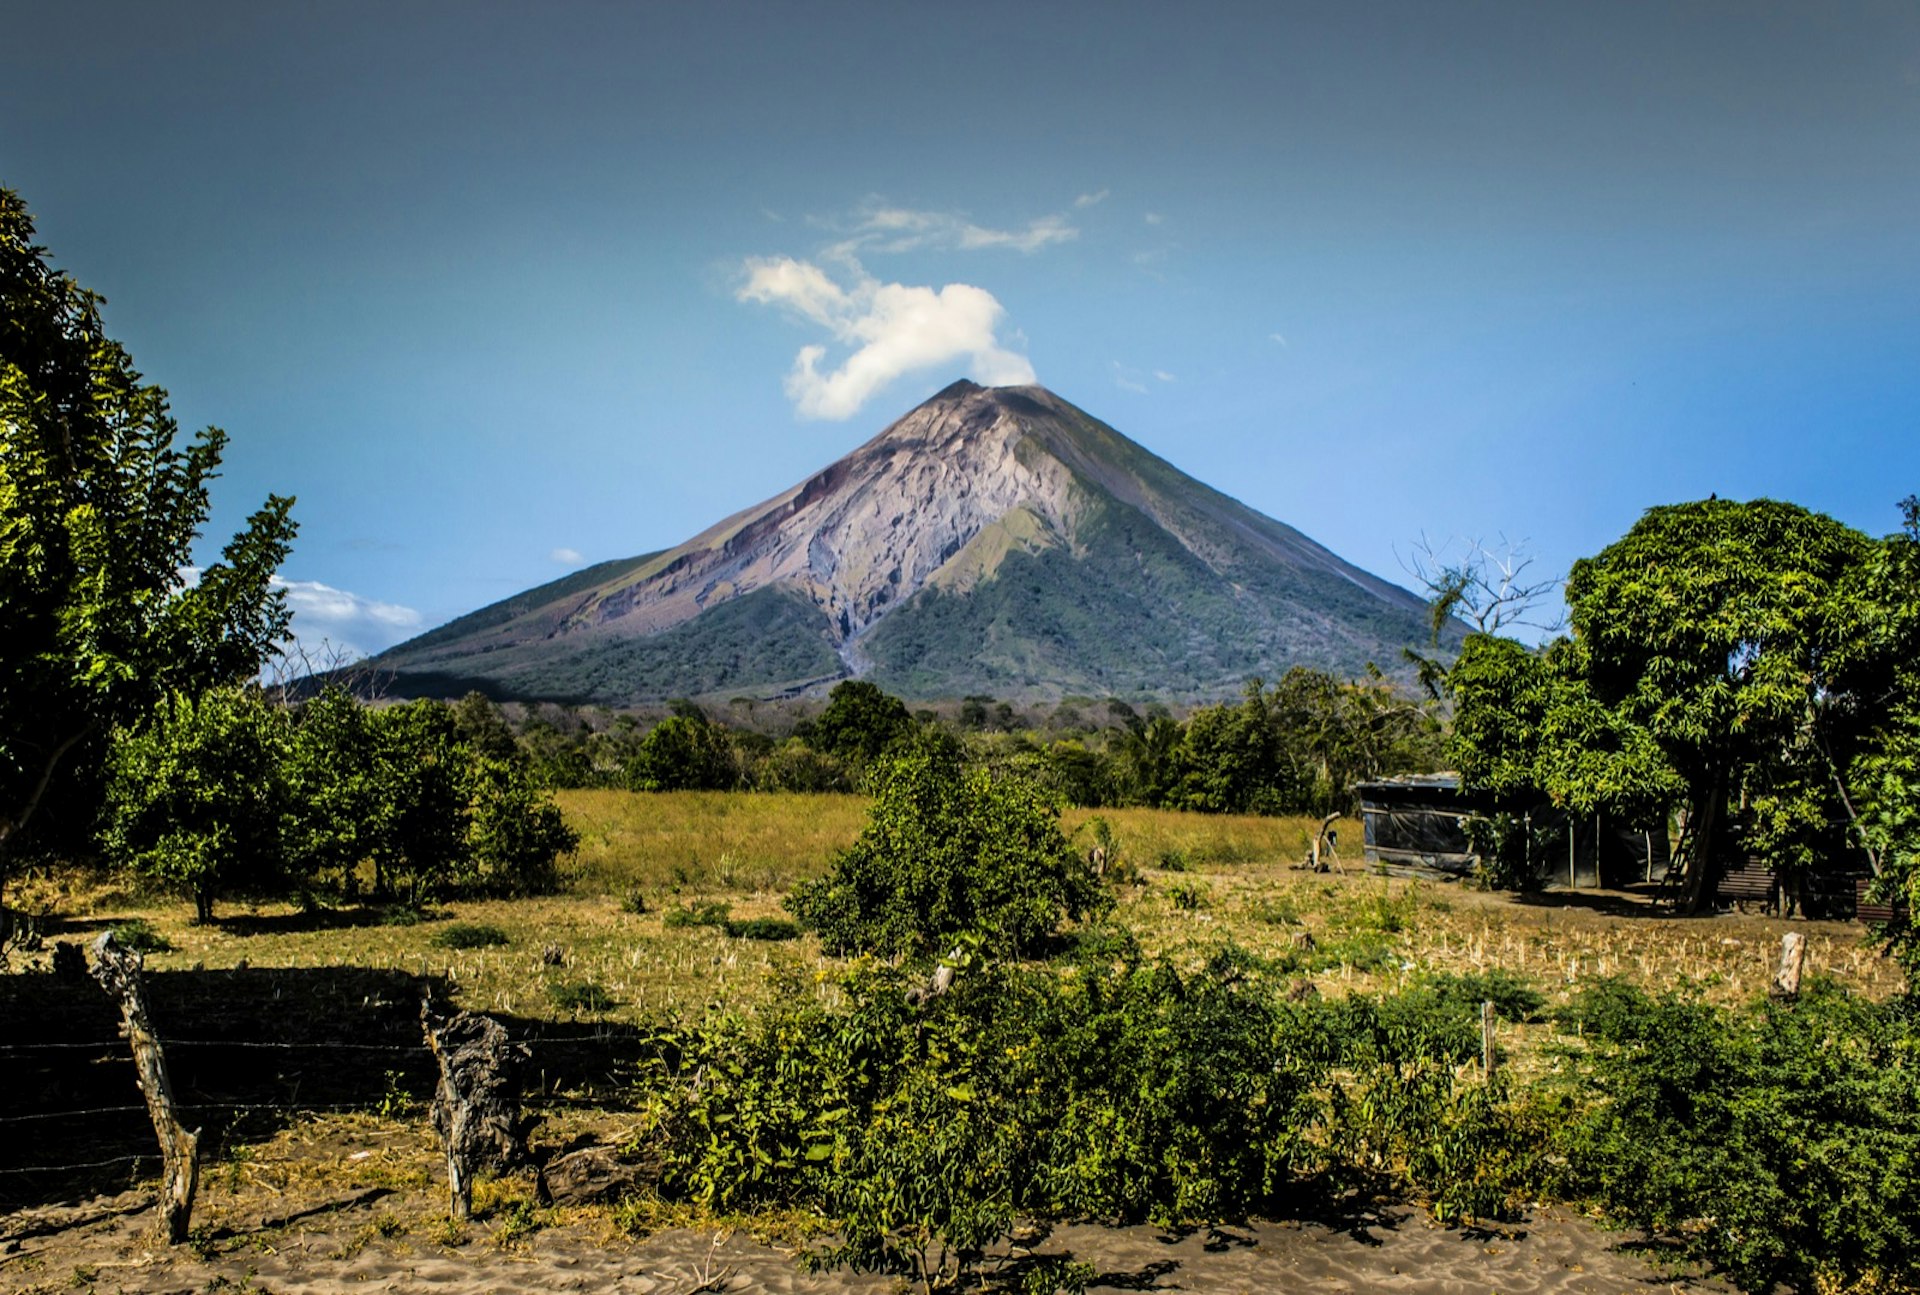 A white plume of smoke escapes from the top a mountain. In front of the mountain is a collection of low-lying shrubs with larger trees framing the sides of the image. Nicaragua travel is still an area of concern for potential visitors. 